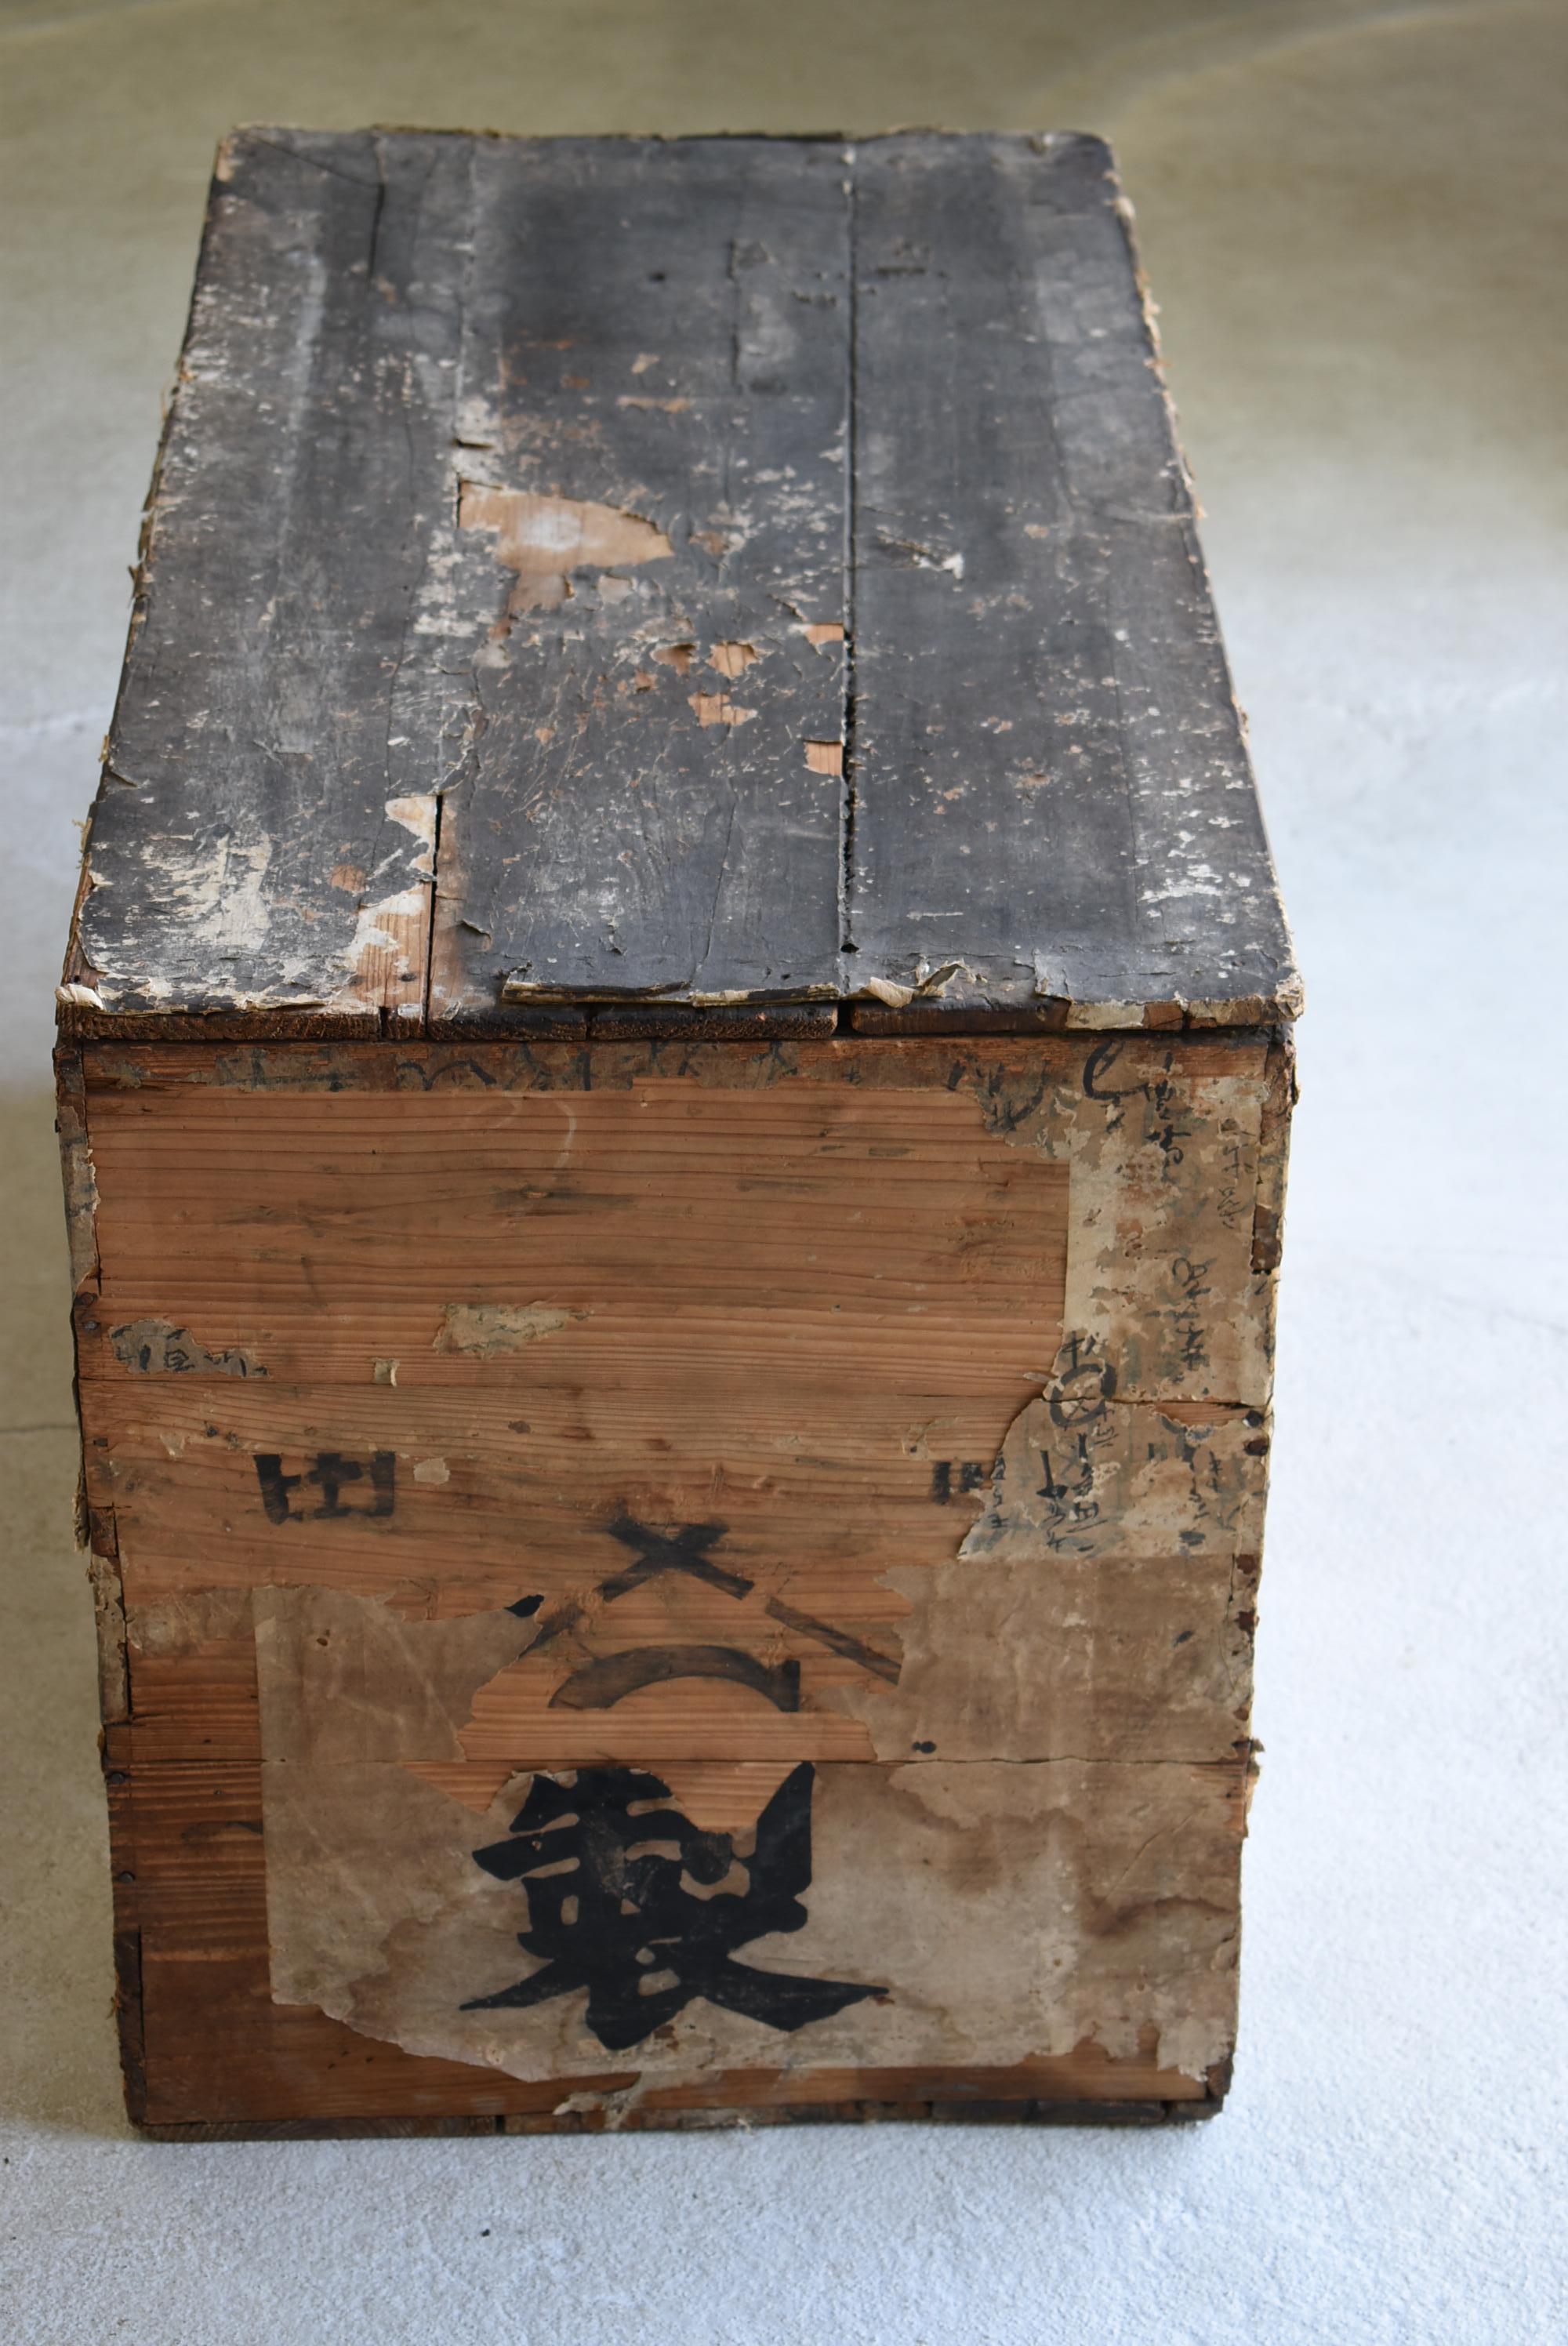 Japanese Old Wooden Box 1860s-1920s/Antique Storage Sideboard Table Wabisabi Art 3